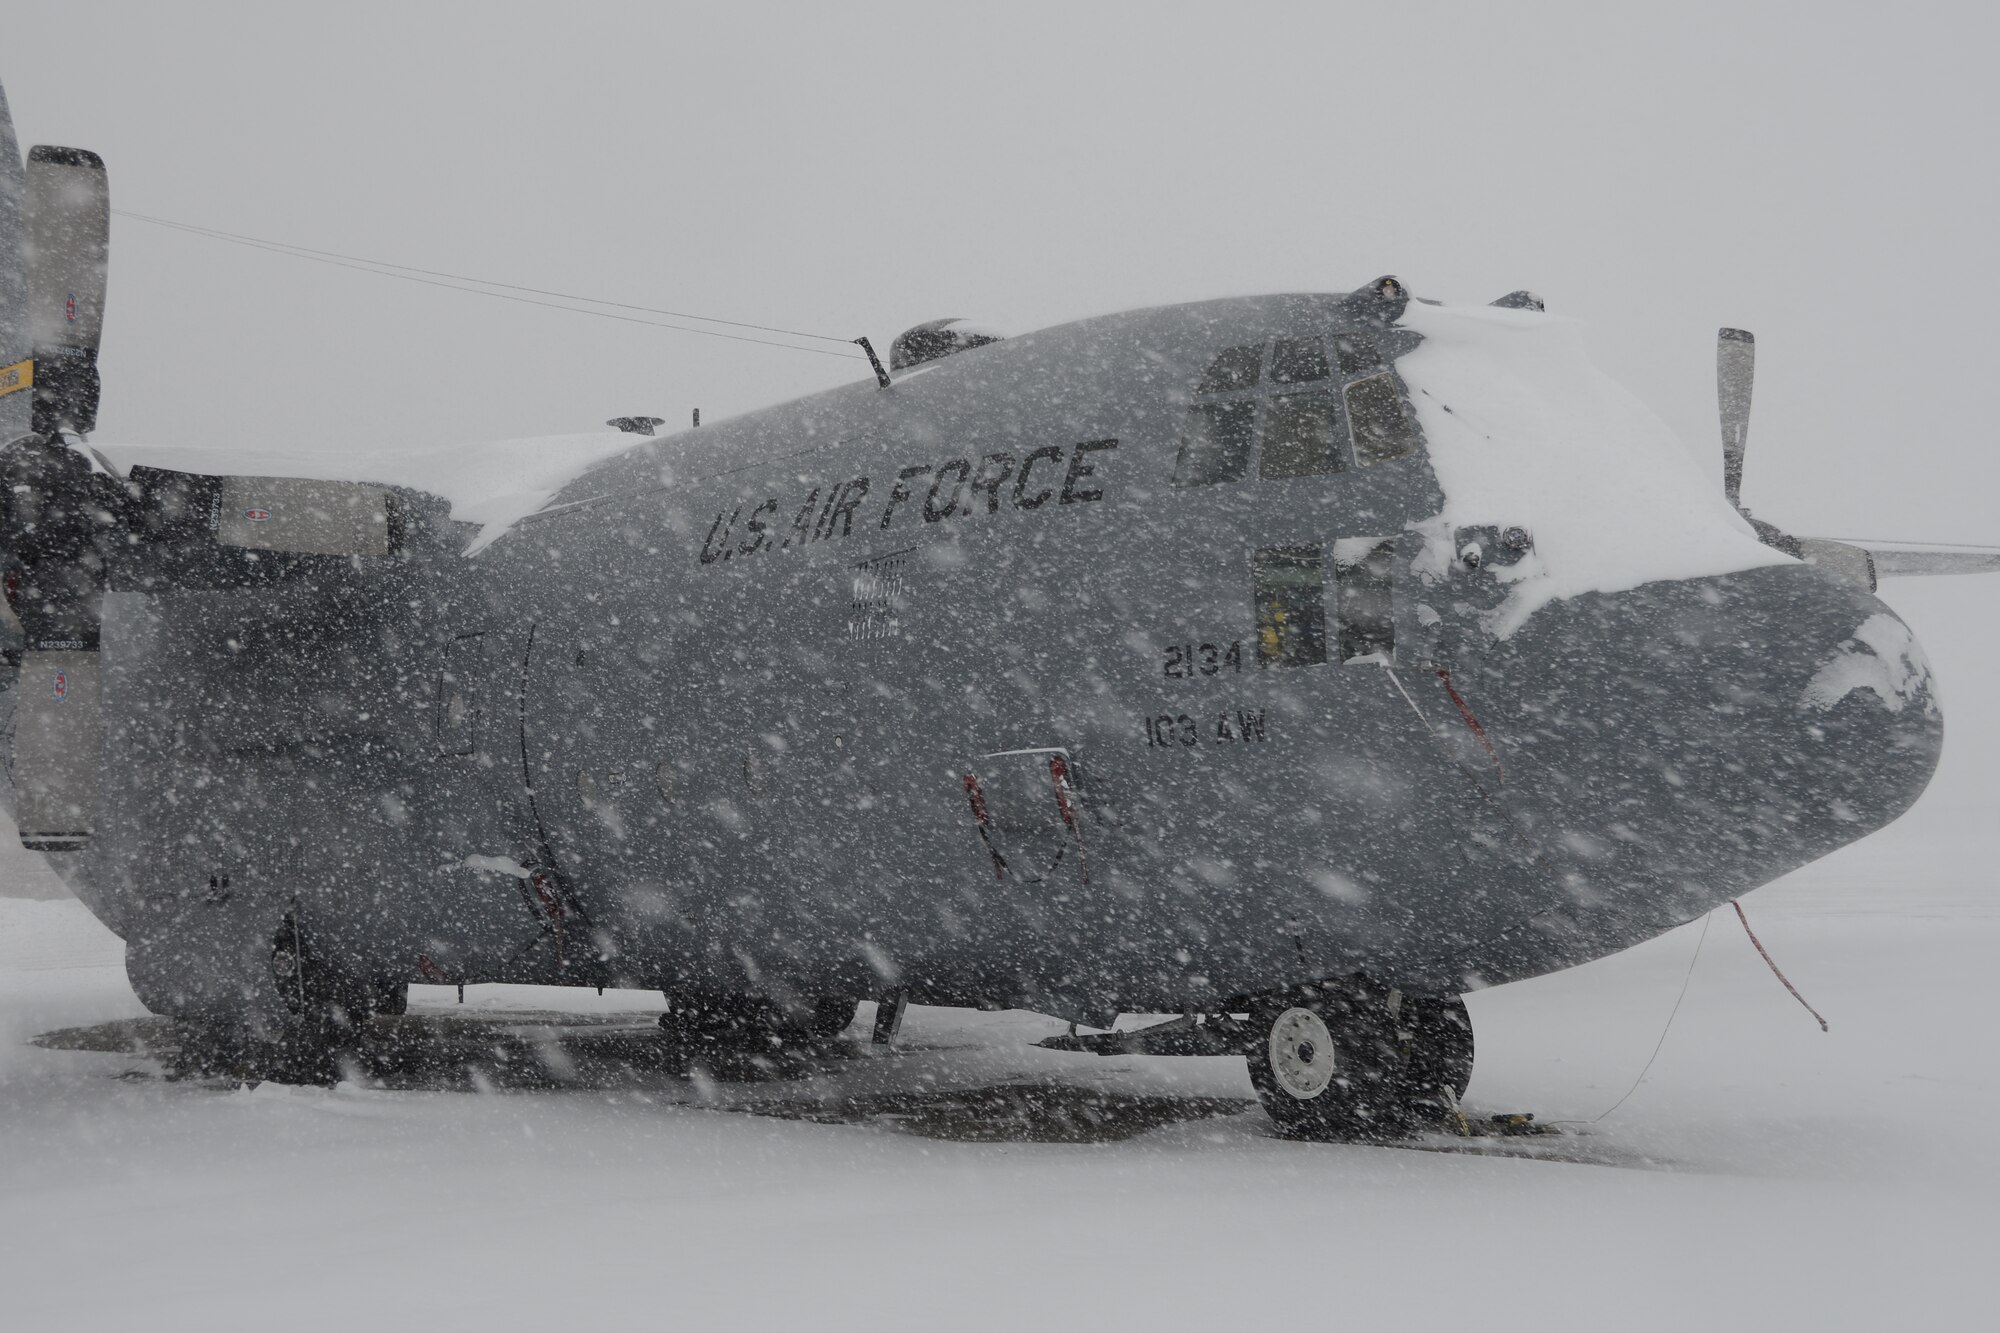 Snow rapidly accumulates on a C-130H aircraft assigned to the 103rd Airlift Wing during a nor’easter at Bradley Air National Guard Base, East Granby, Conn., Feb. 13, 2014. More than 200 Airmen reported to work here and at the Orange Air National Guard Station, ready to answer the call in the event the state required assistance during the height of the storm.  (U.S. Air National Guard photo by Maj. Bryon M. Turner)